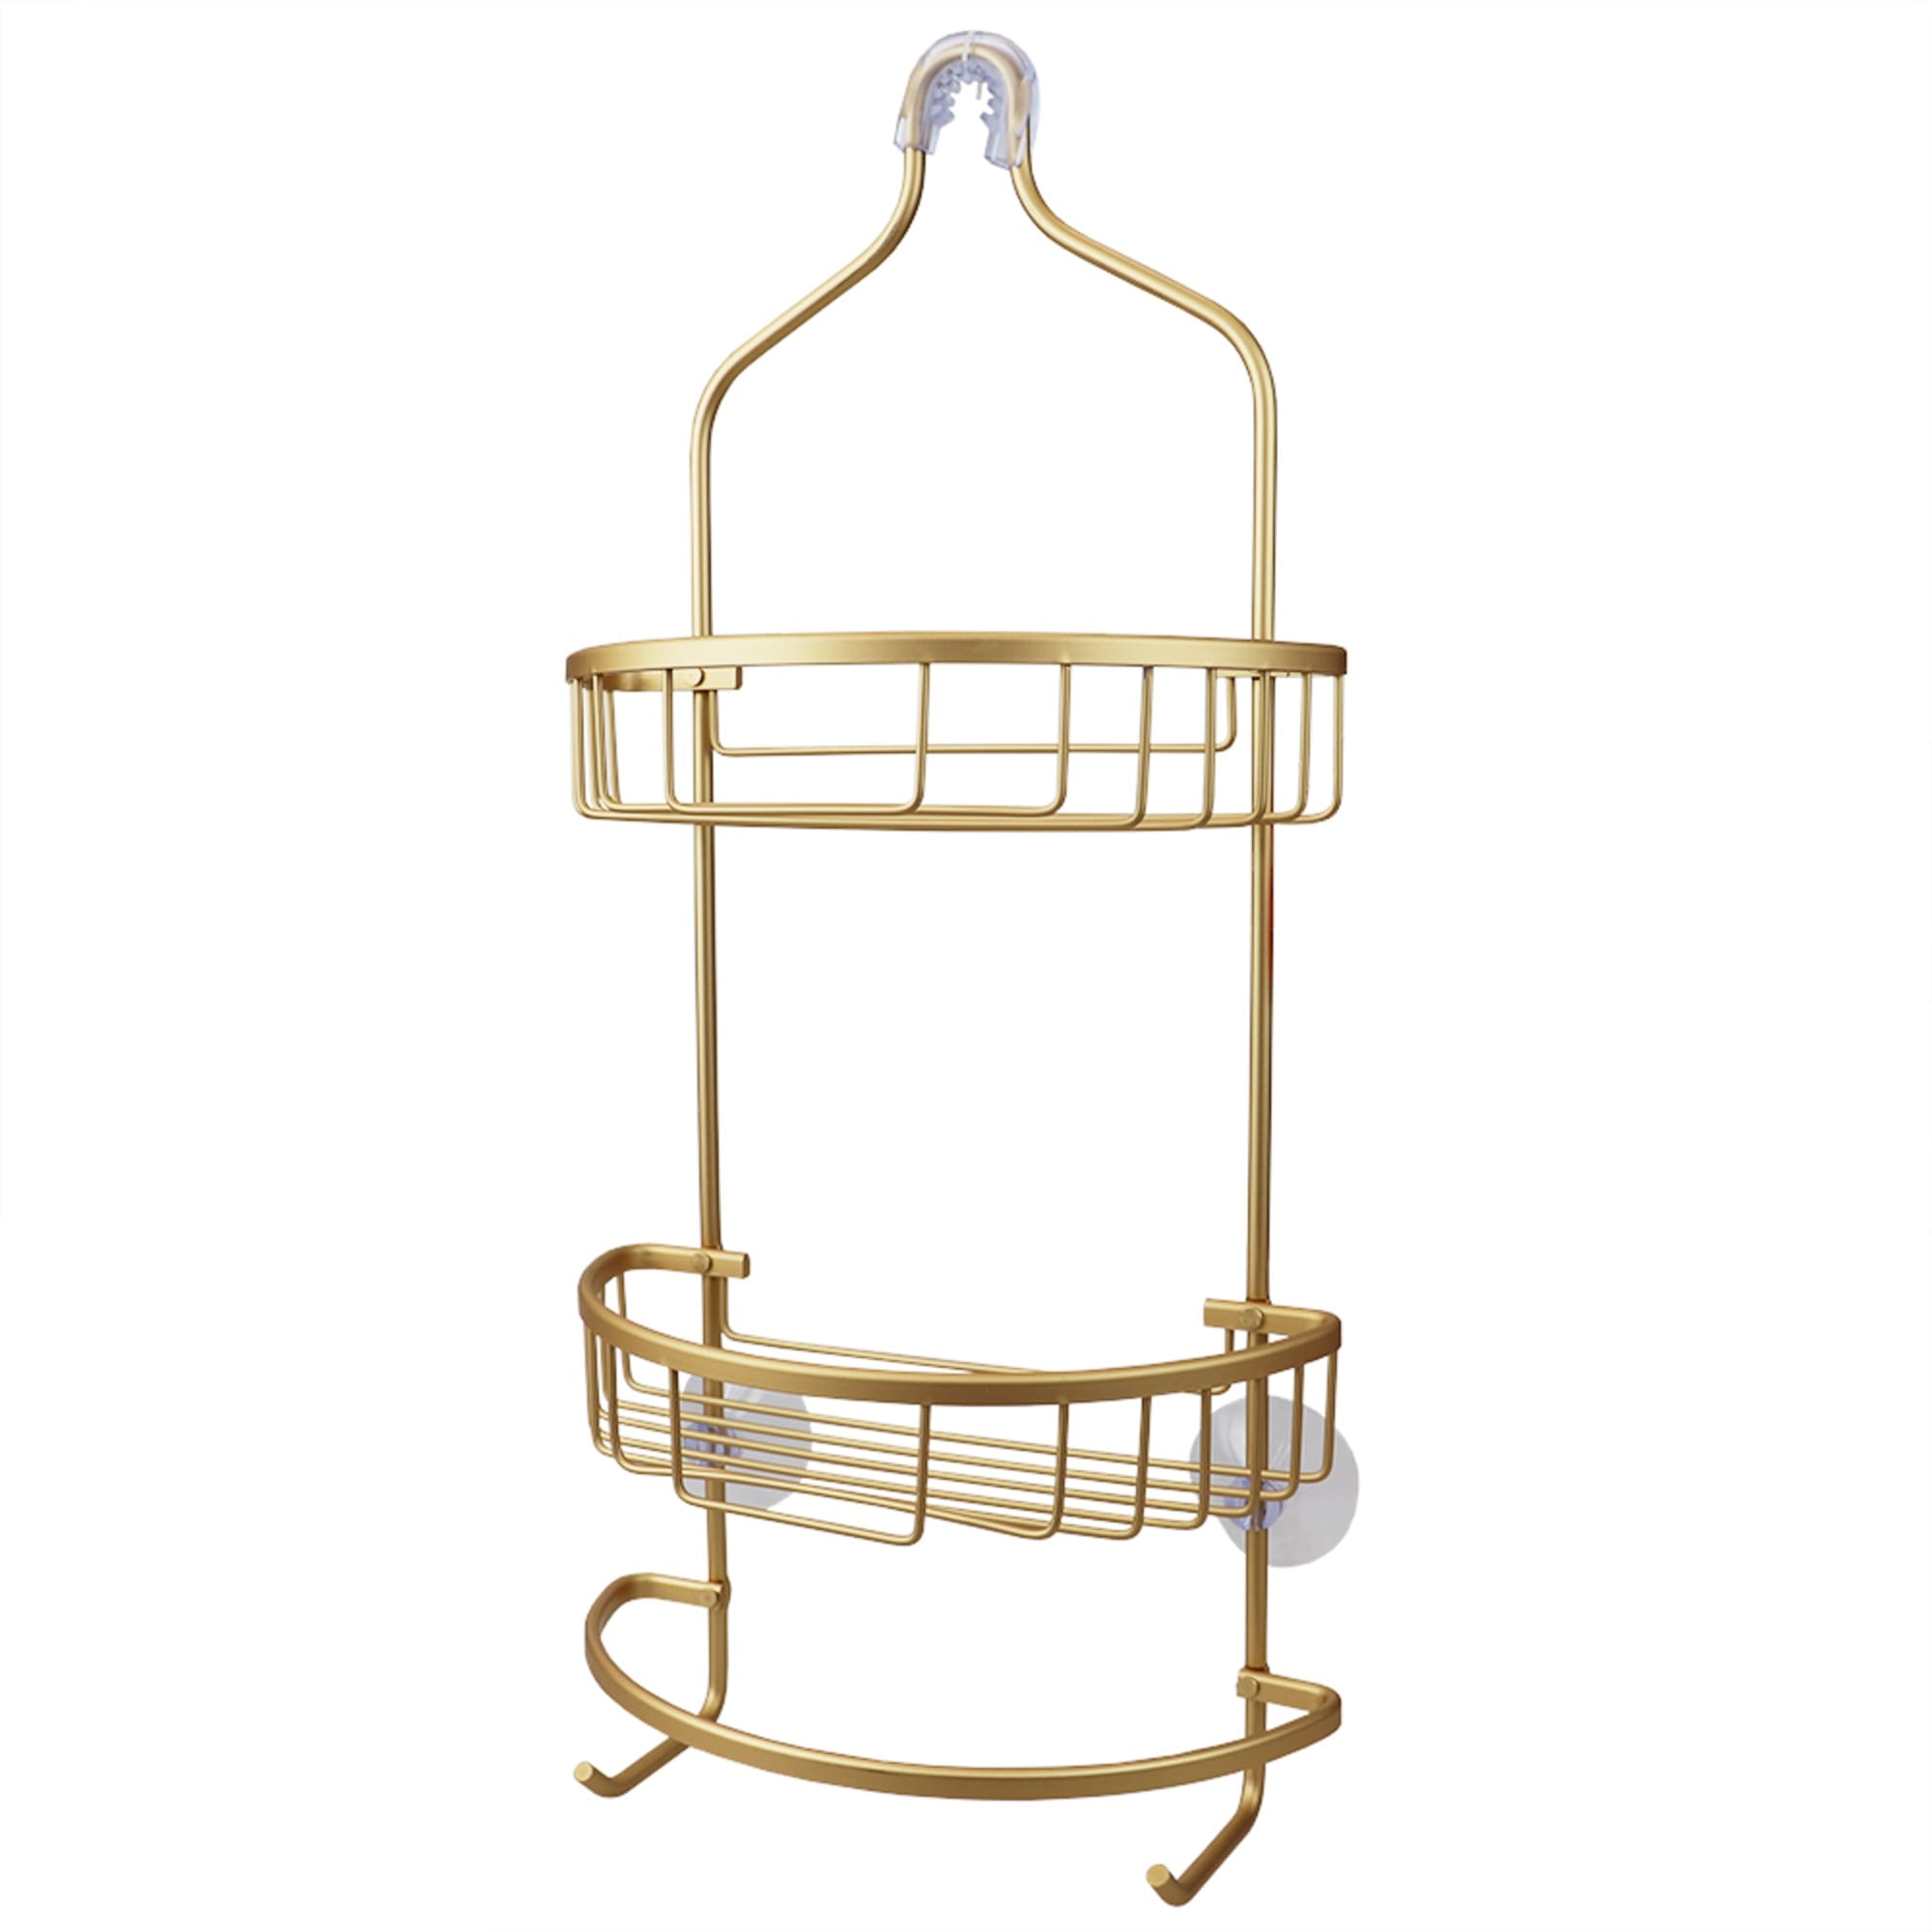 Home Basics 2 Tier Aluminum Suctioned Shower Caddy with Towel Rack and Integrated Hooks, Gold $15 EACH, CASE PACK OF 6